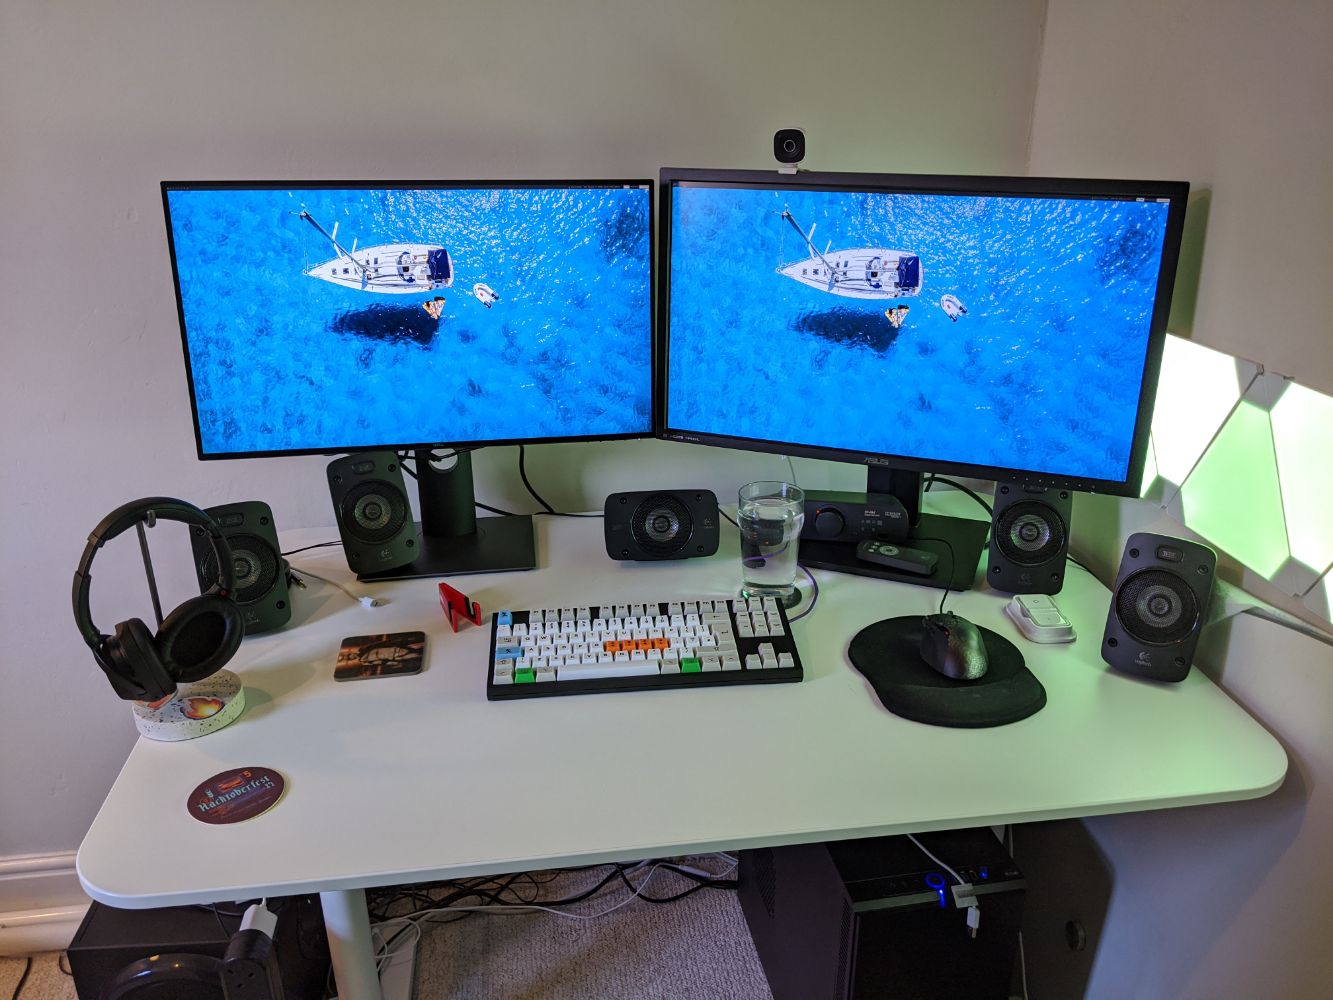 Two 27" 4K monitors plugged into Jamie's desktop, with a mechanical keyboard, and a fair bit of room on the desk